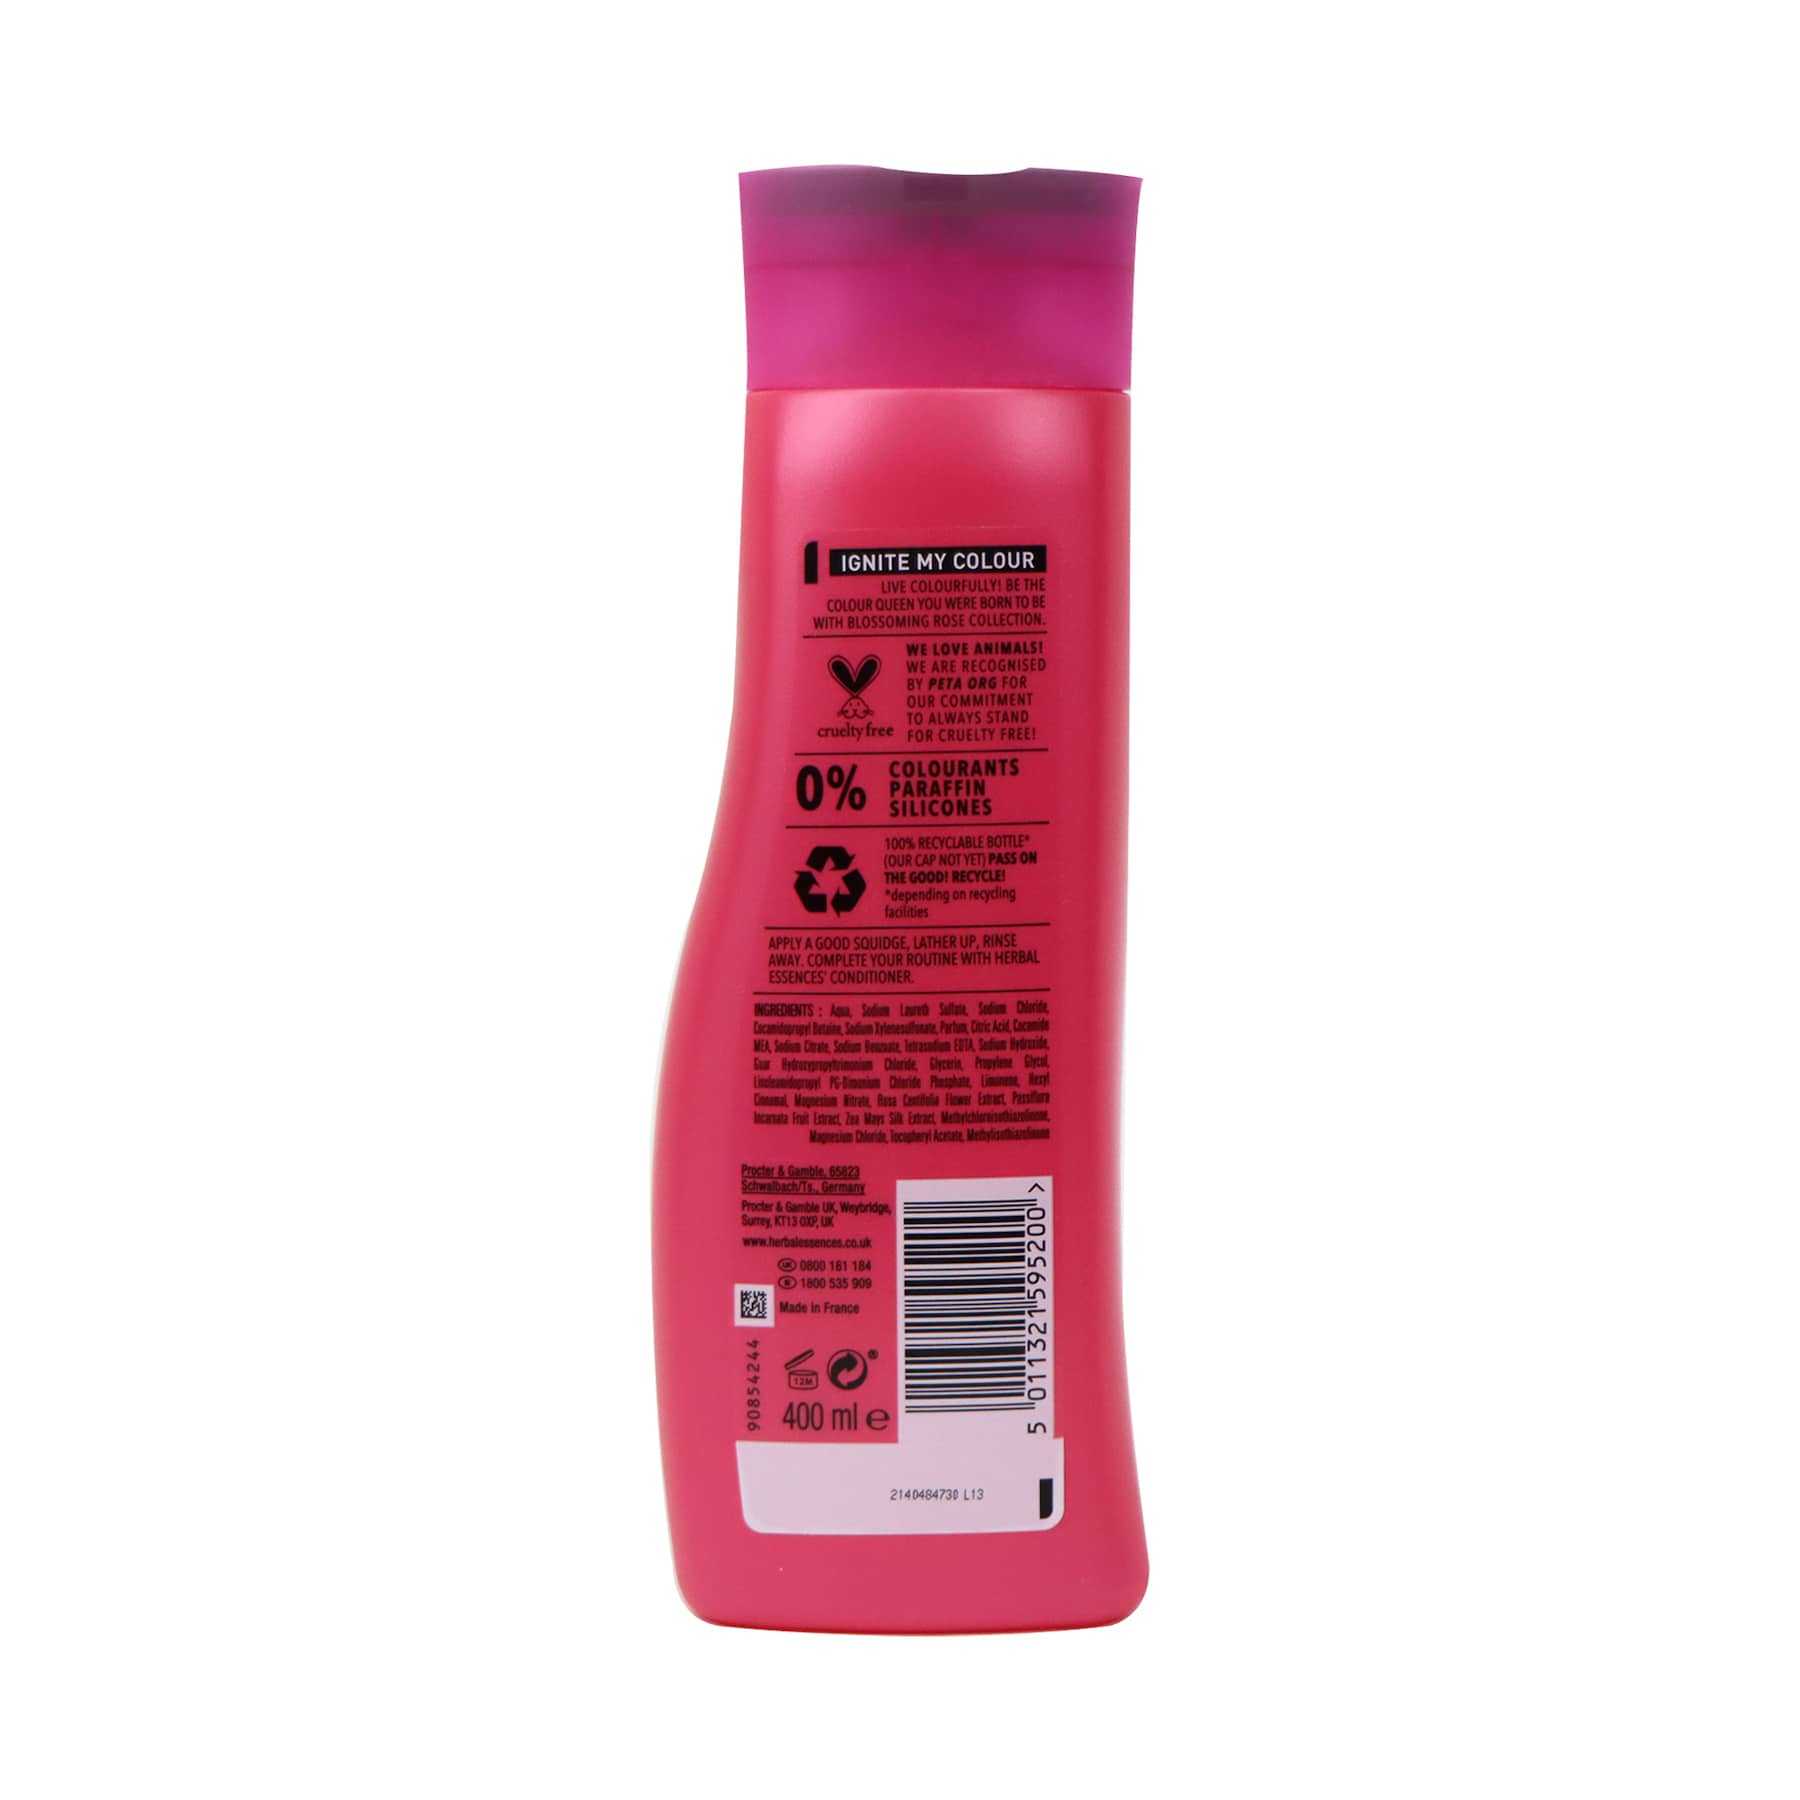 [P&G] Herbal Essences Ignite My Colour with Rose Extract Shampoo 400ml